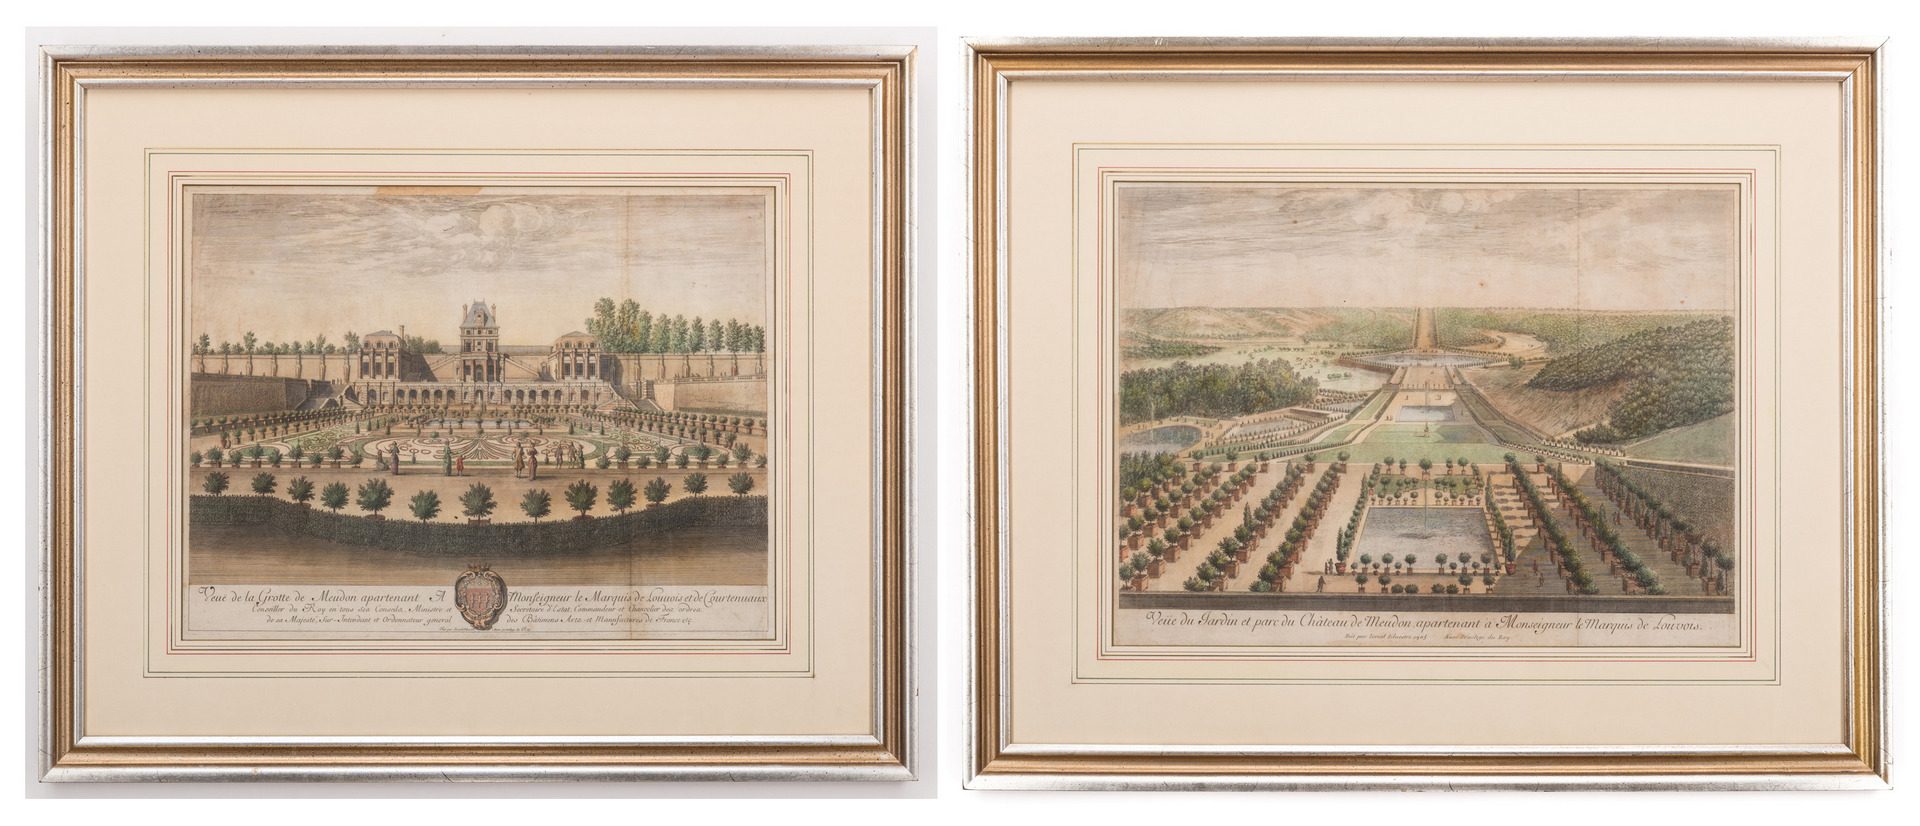 Lot 312: 2 French Chateau Engravings, Silvestre